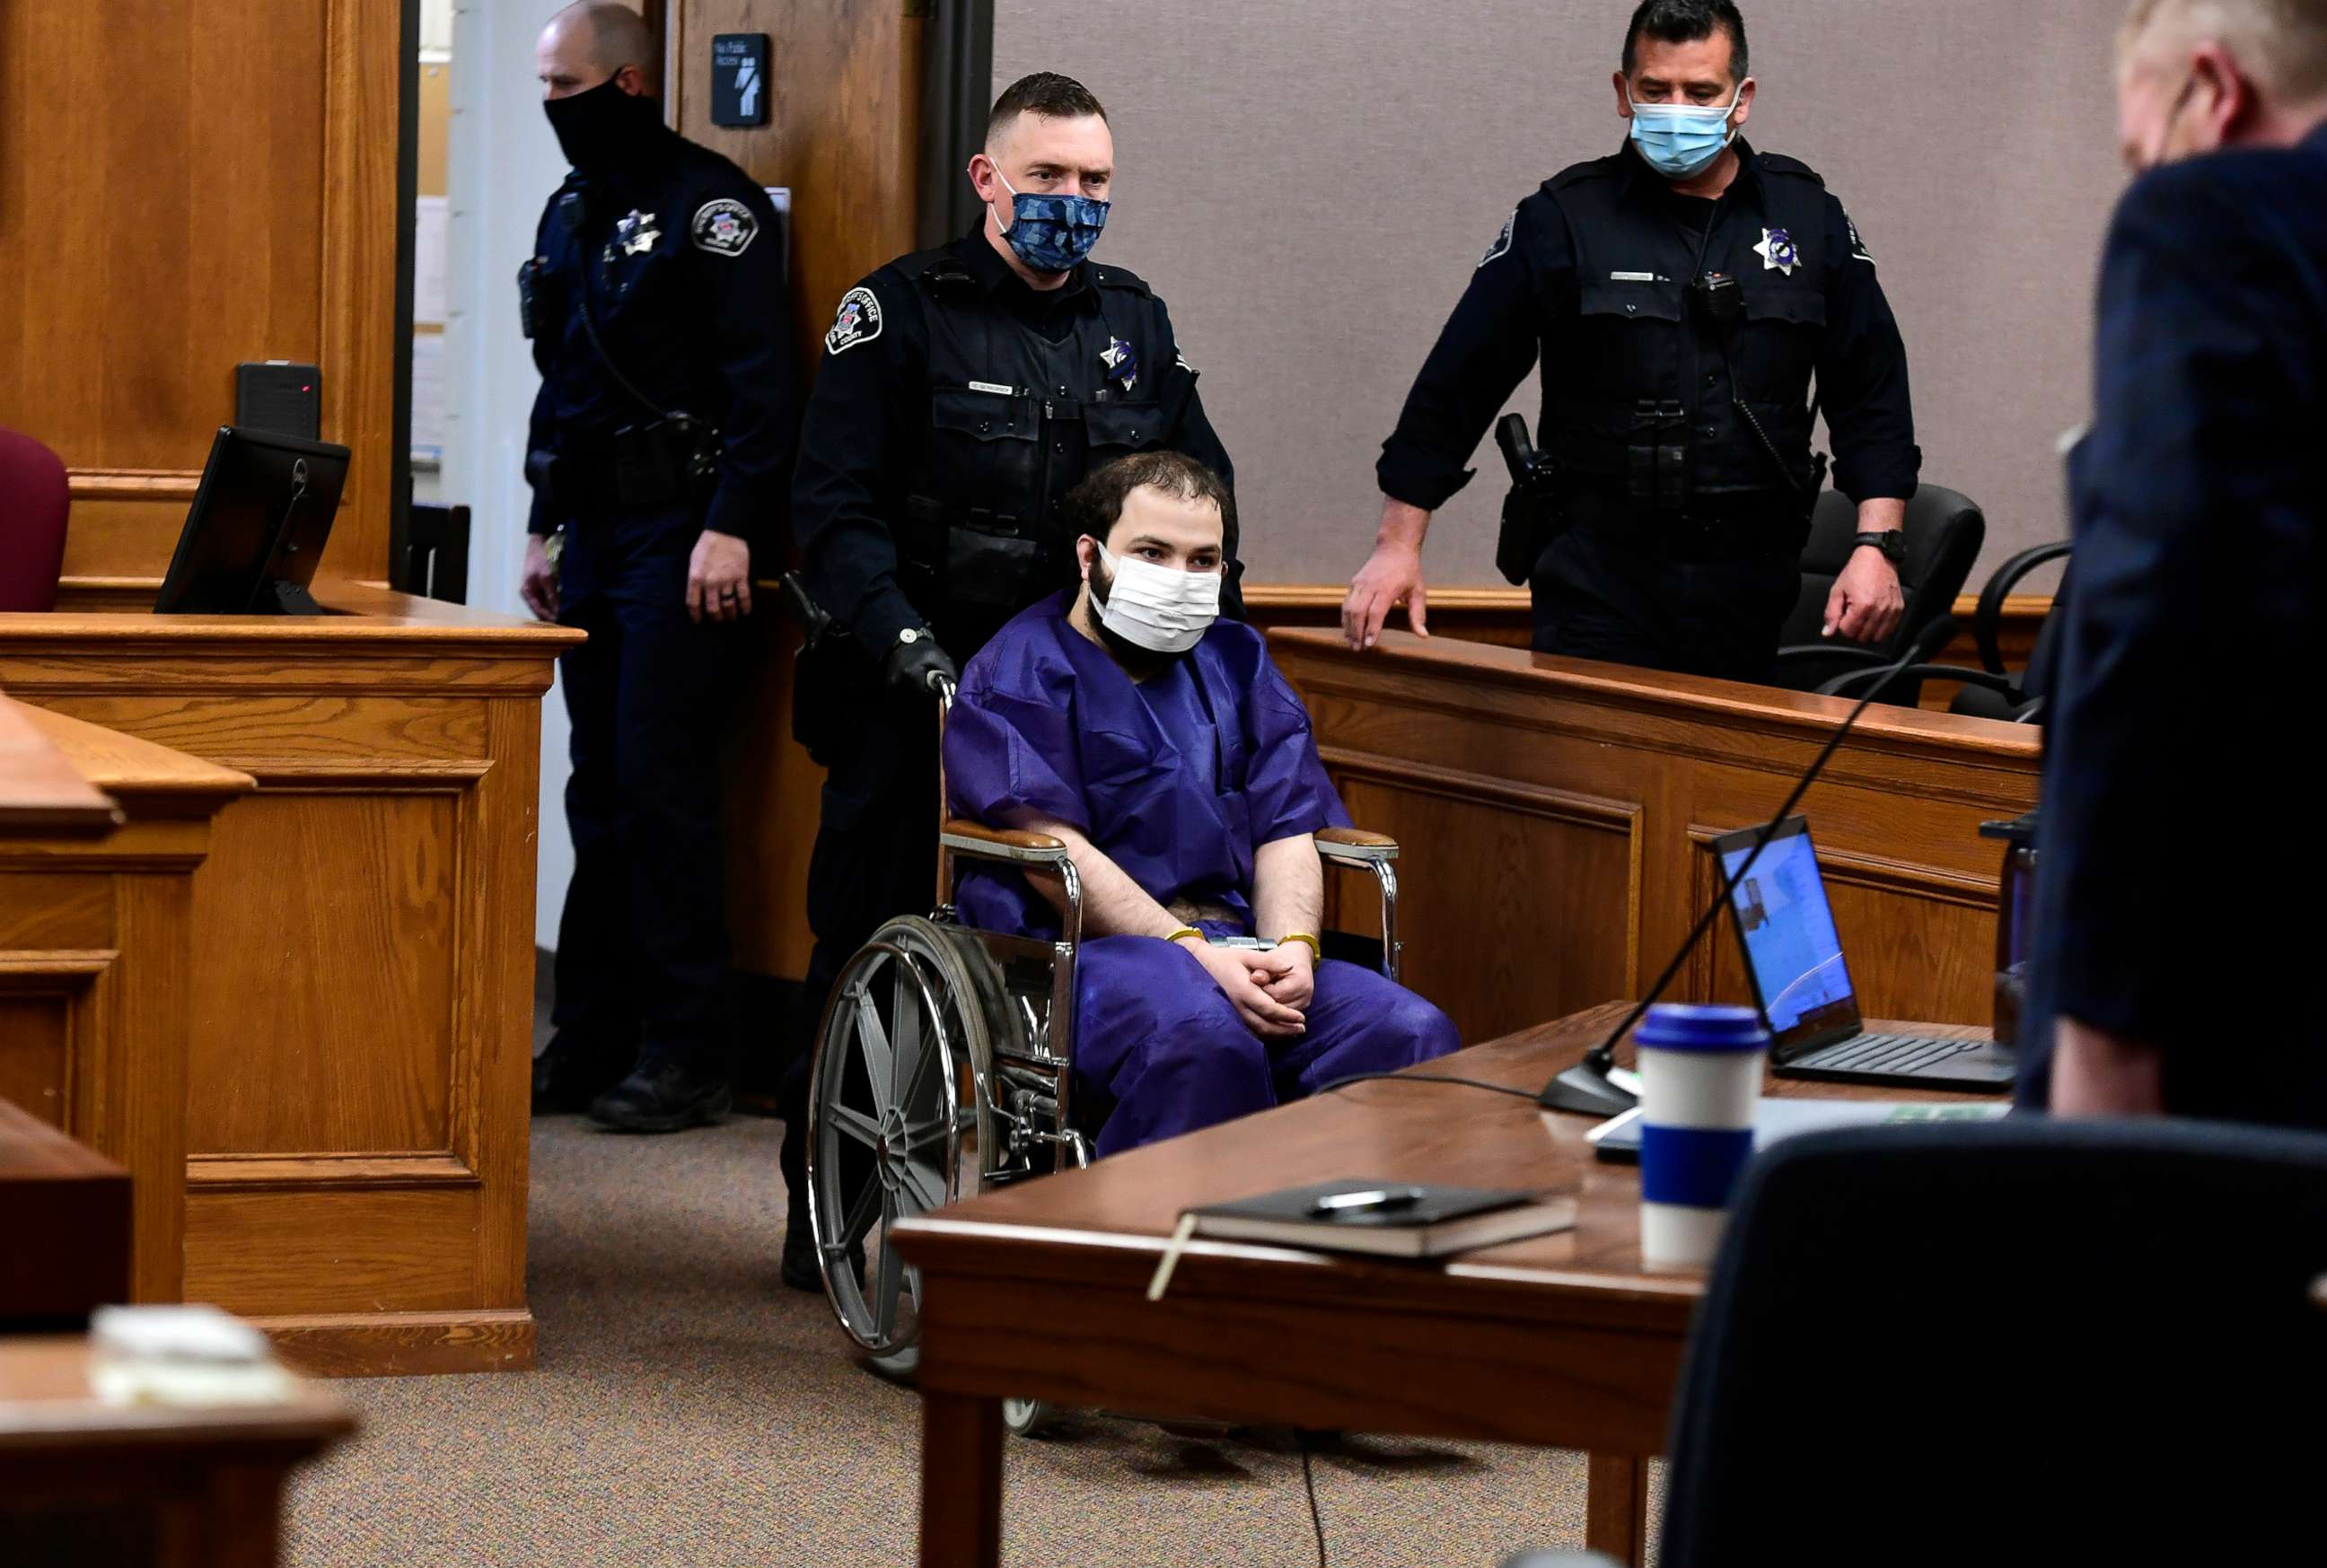 PHOTO: Ahmad Al Aliwi Alissa, 21, appears before Boulder District Court Judge Thomas Mulvahill at the Boulder County Justice Center in Boulder, Colo., March 25, 2021.